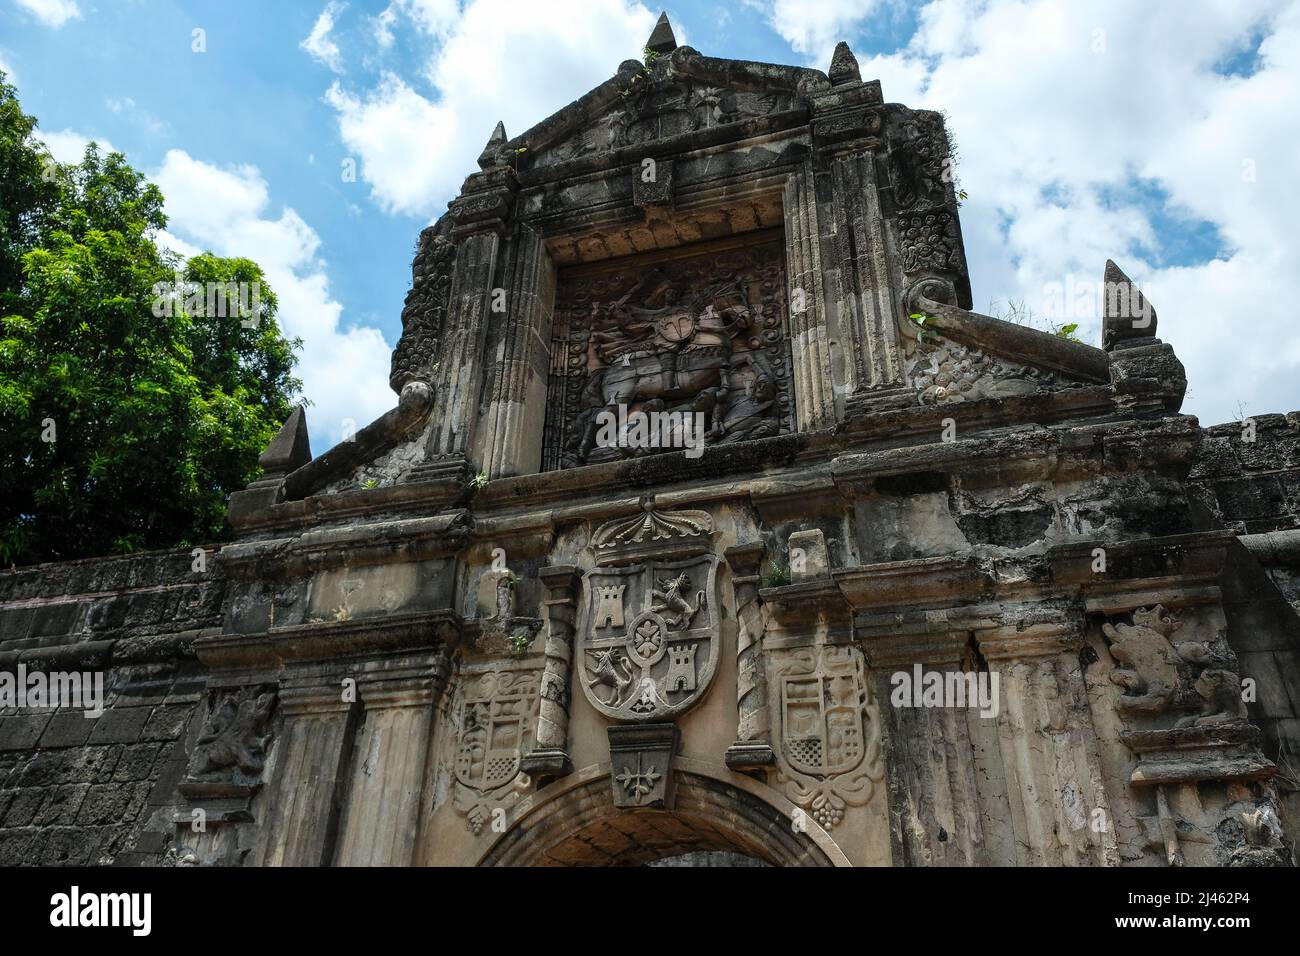 Fort Santiago Gate in Intramuros, Manila, Philippines. The defense fortress is located in Intramuros, the walled city of Manila. Stock Photo